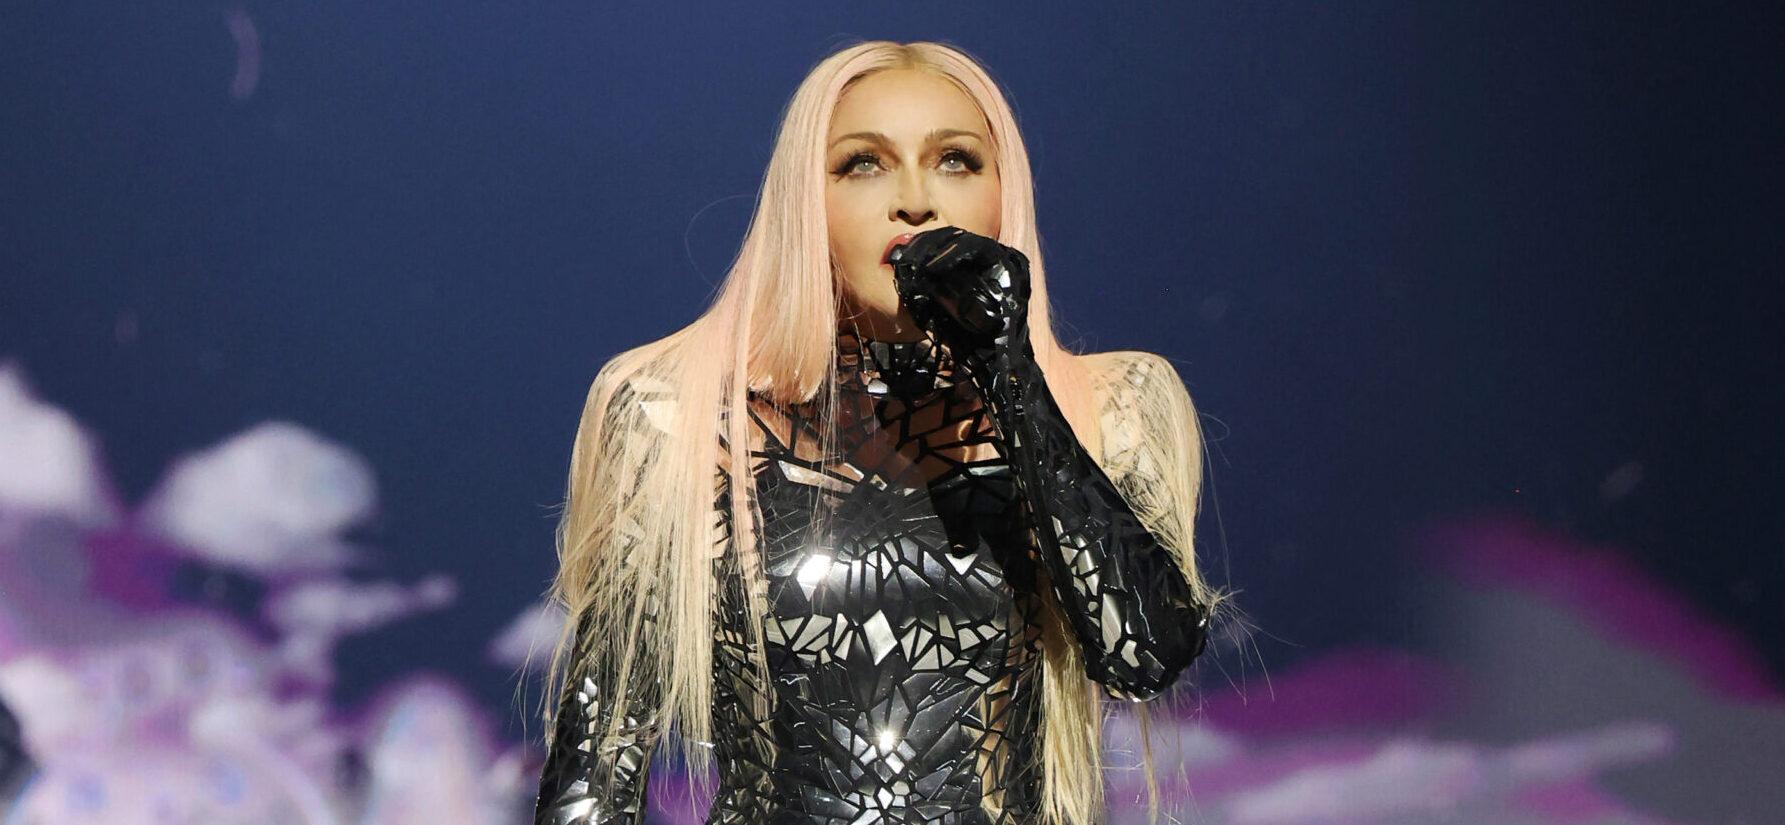 Madonna kicks off her world tour "The Celebration Tour" with her first concert in London.